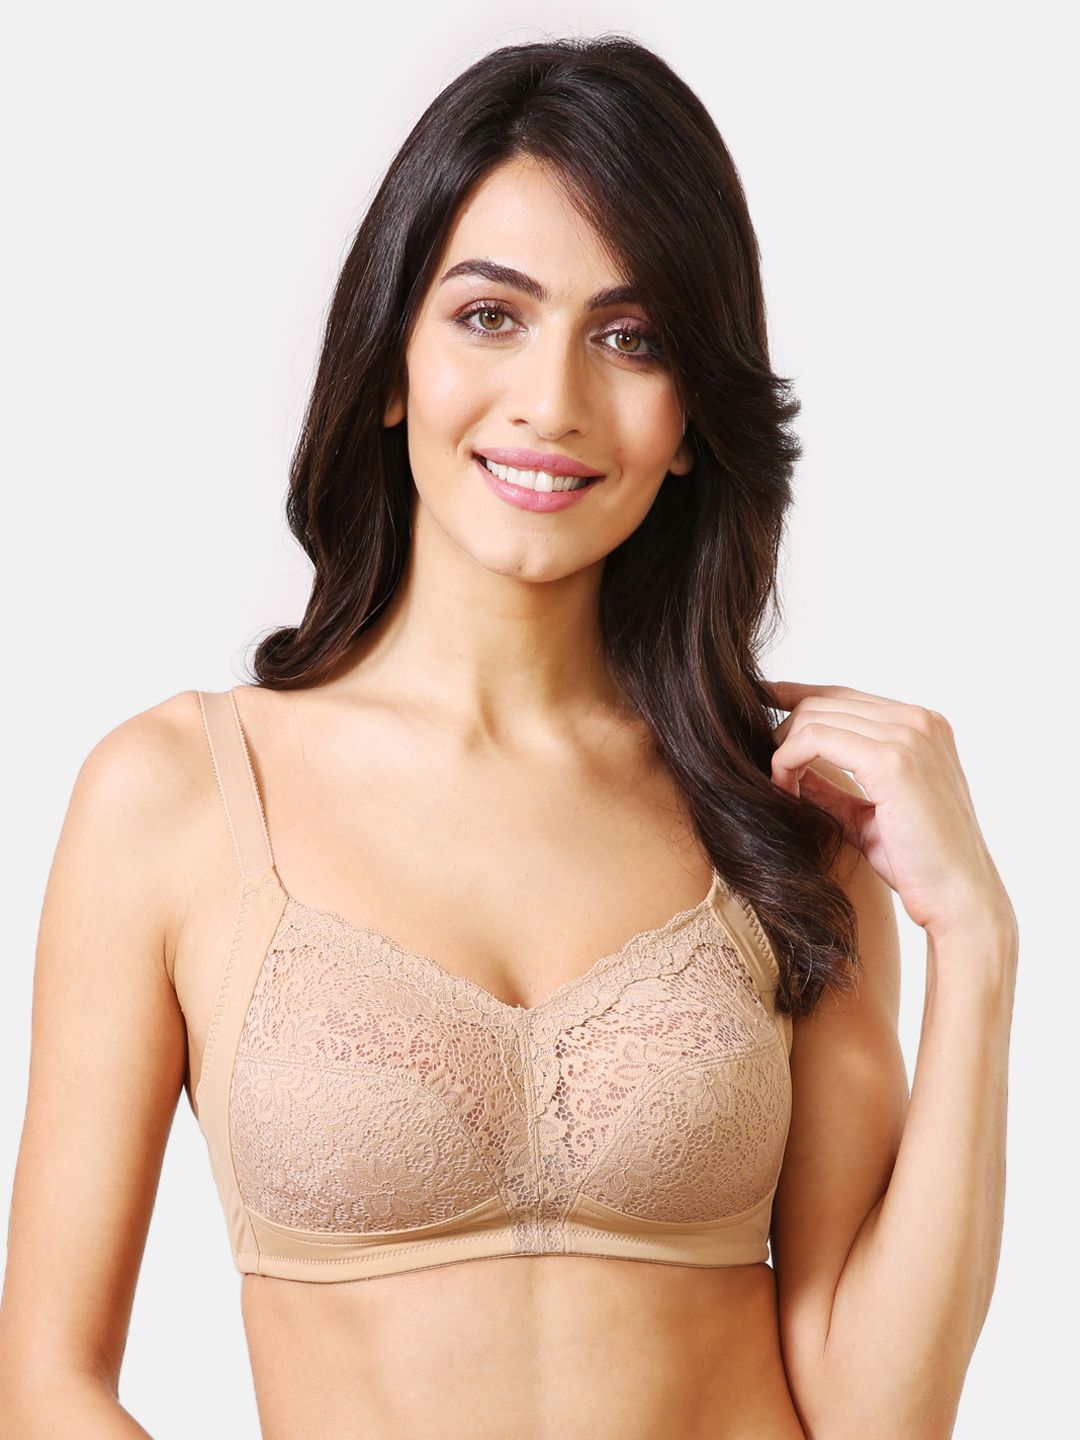 Van Heusen Beige Lace Non-Wired Non Padded Everyday Soft Cup Bra ILIBR1LXSWW3722004 Price in India